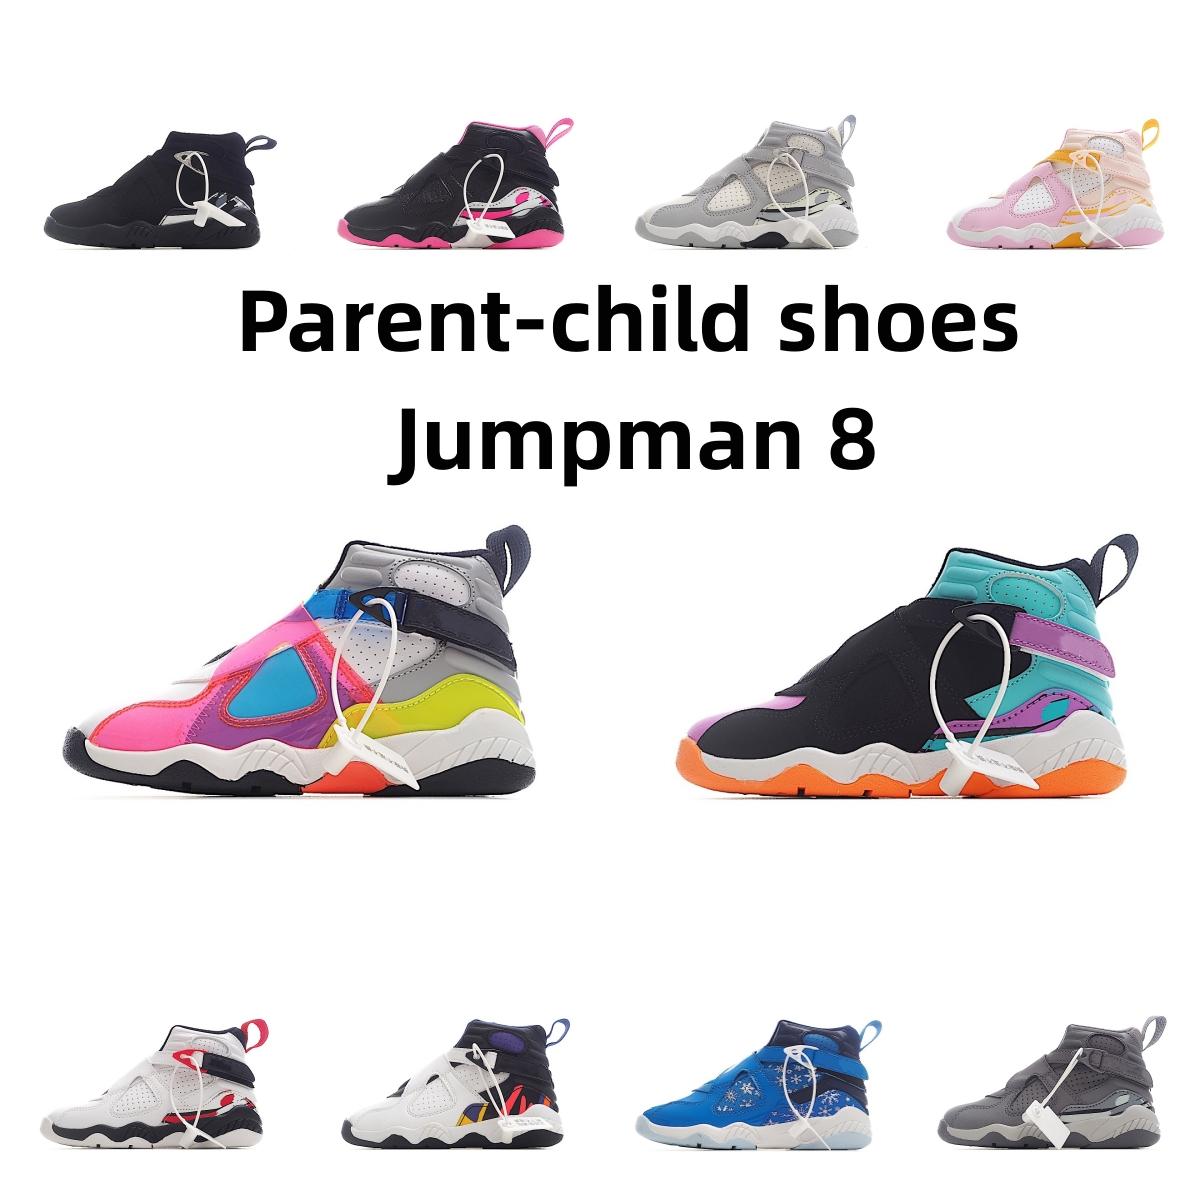 Jumpman 8 Kid Basketball Shoes Grape 8s Boys and Girls Designer ouder-kind trainers sneakers